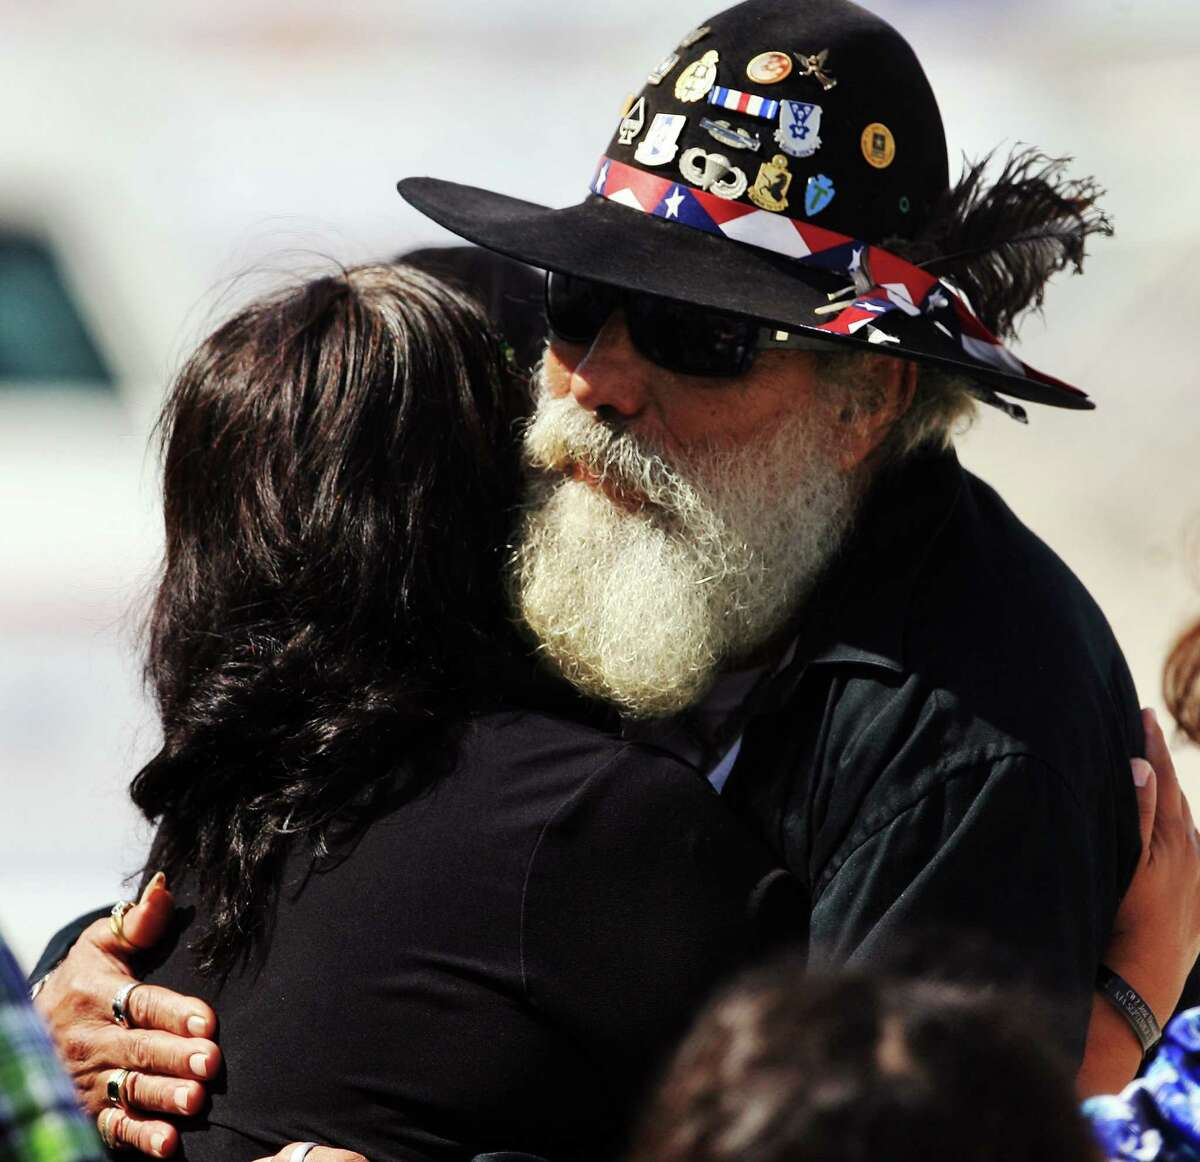 Army Veteran Macario Jose Mejia hugs Reyna Torres, mother of U.S. Army Warrant Officer Jose Luis Montenegro Jr., as they wait for the arrival of his casket Sunday, Sept. 16, 2012 at McCreery Aviation in McAllen, Texas. Montenegro was stationed at Fort Bragg, N.C., and was serving his third tour of duty overseas when his helicopter was shot down in Afghanistan's Logar province. (AP Photo/The Monitor, Gabe Hernandez)